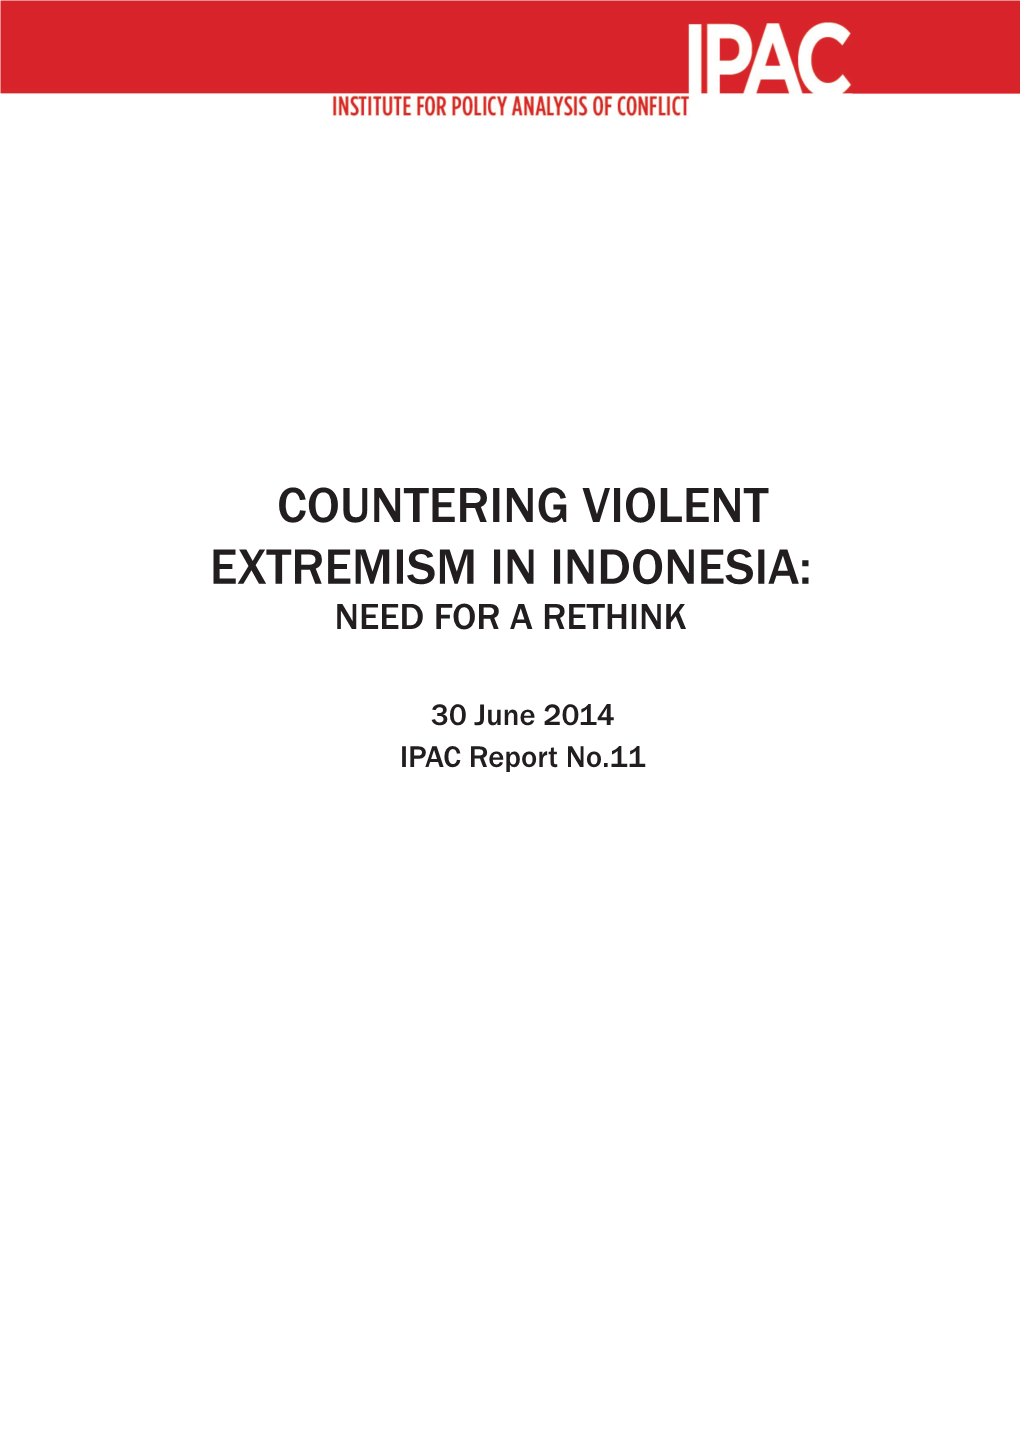 Countering Violent Extremism in Indonesia: Need for a Rethink